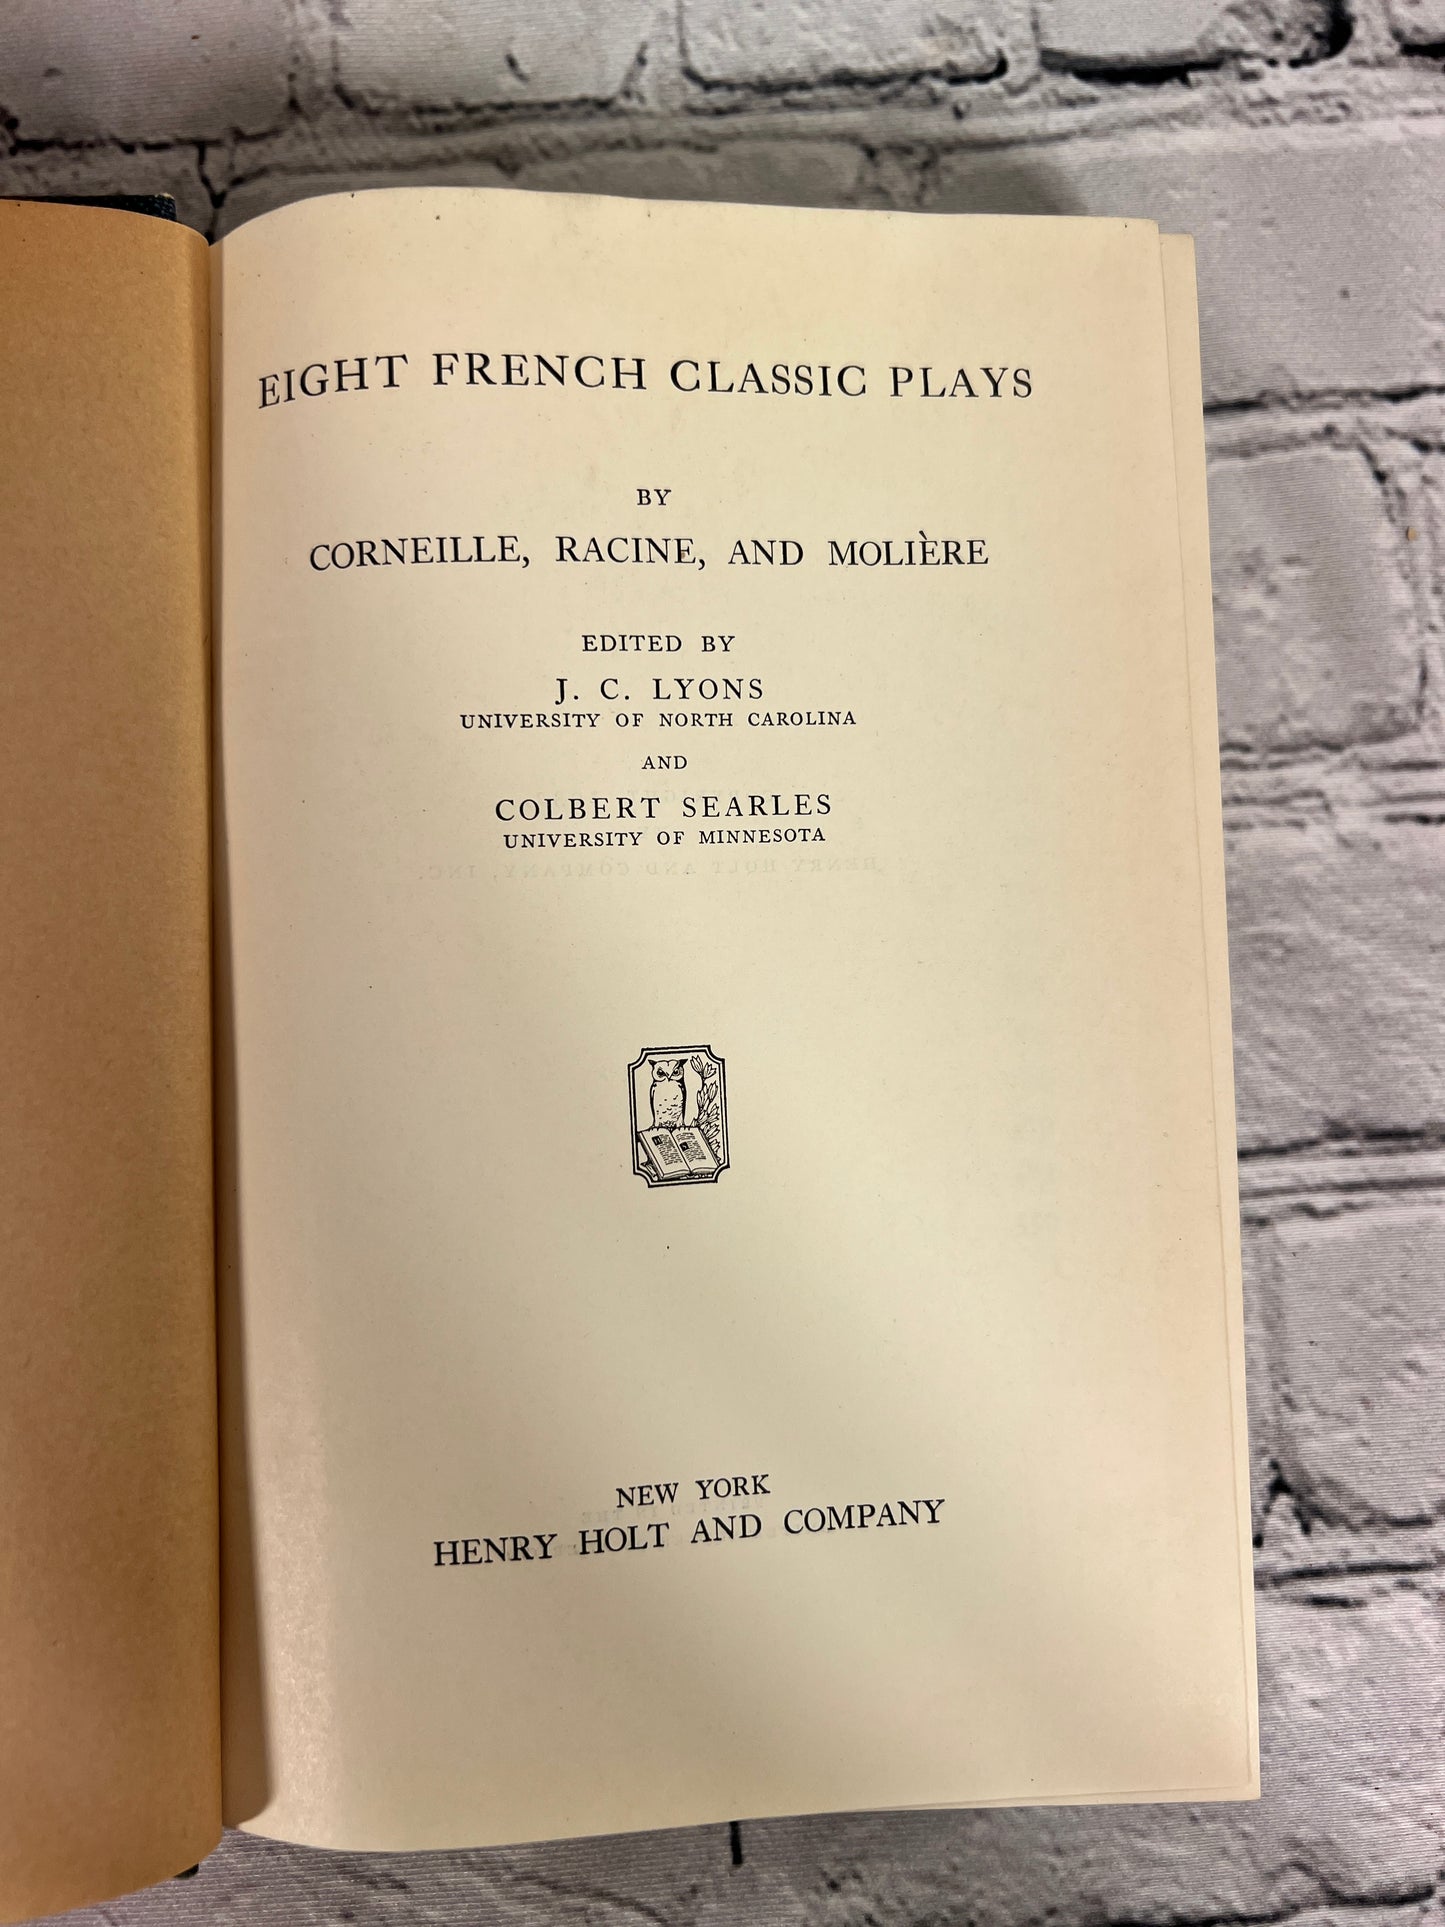 Eight French Classic Plays by Cornille, Racine, and Moliere [1932]